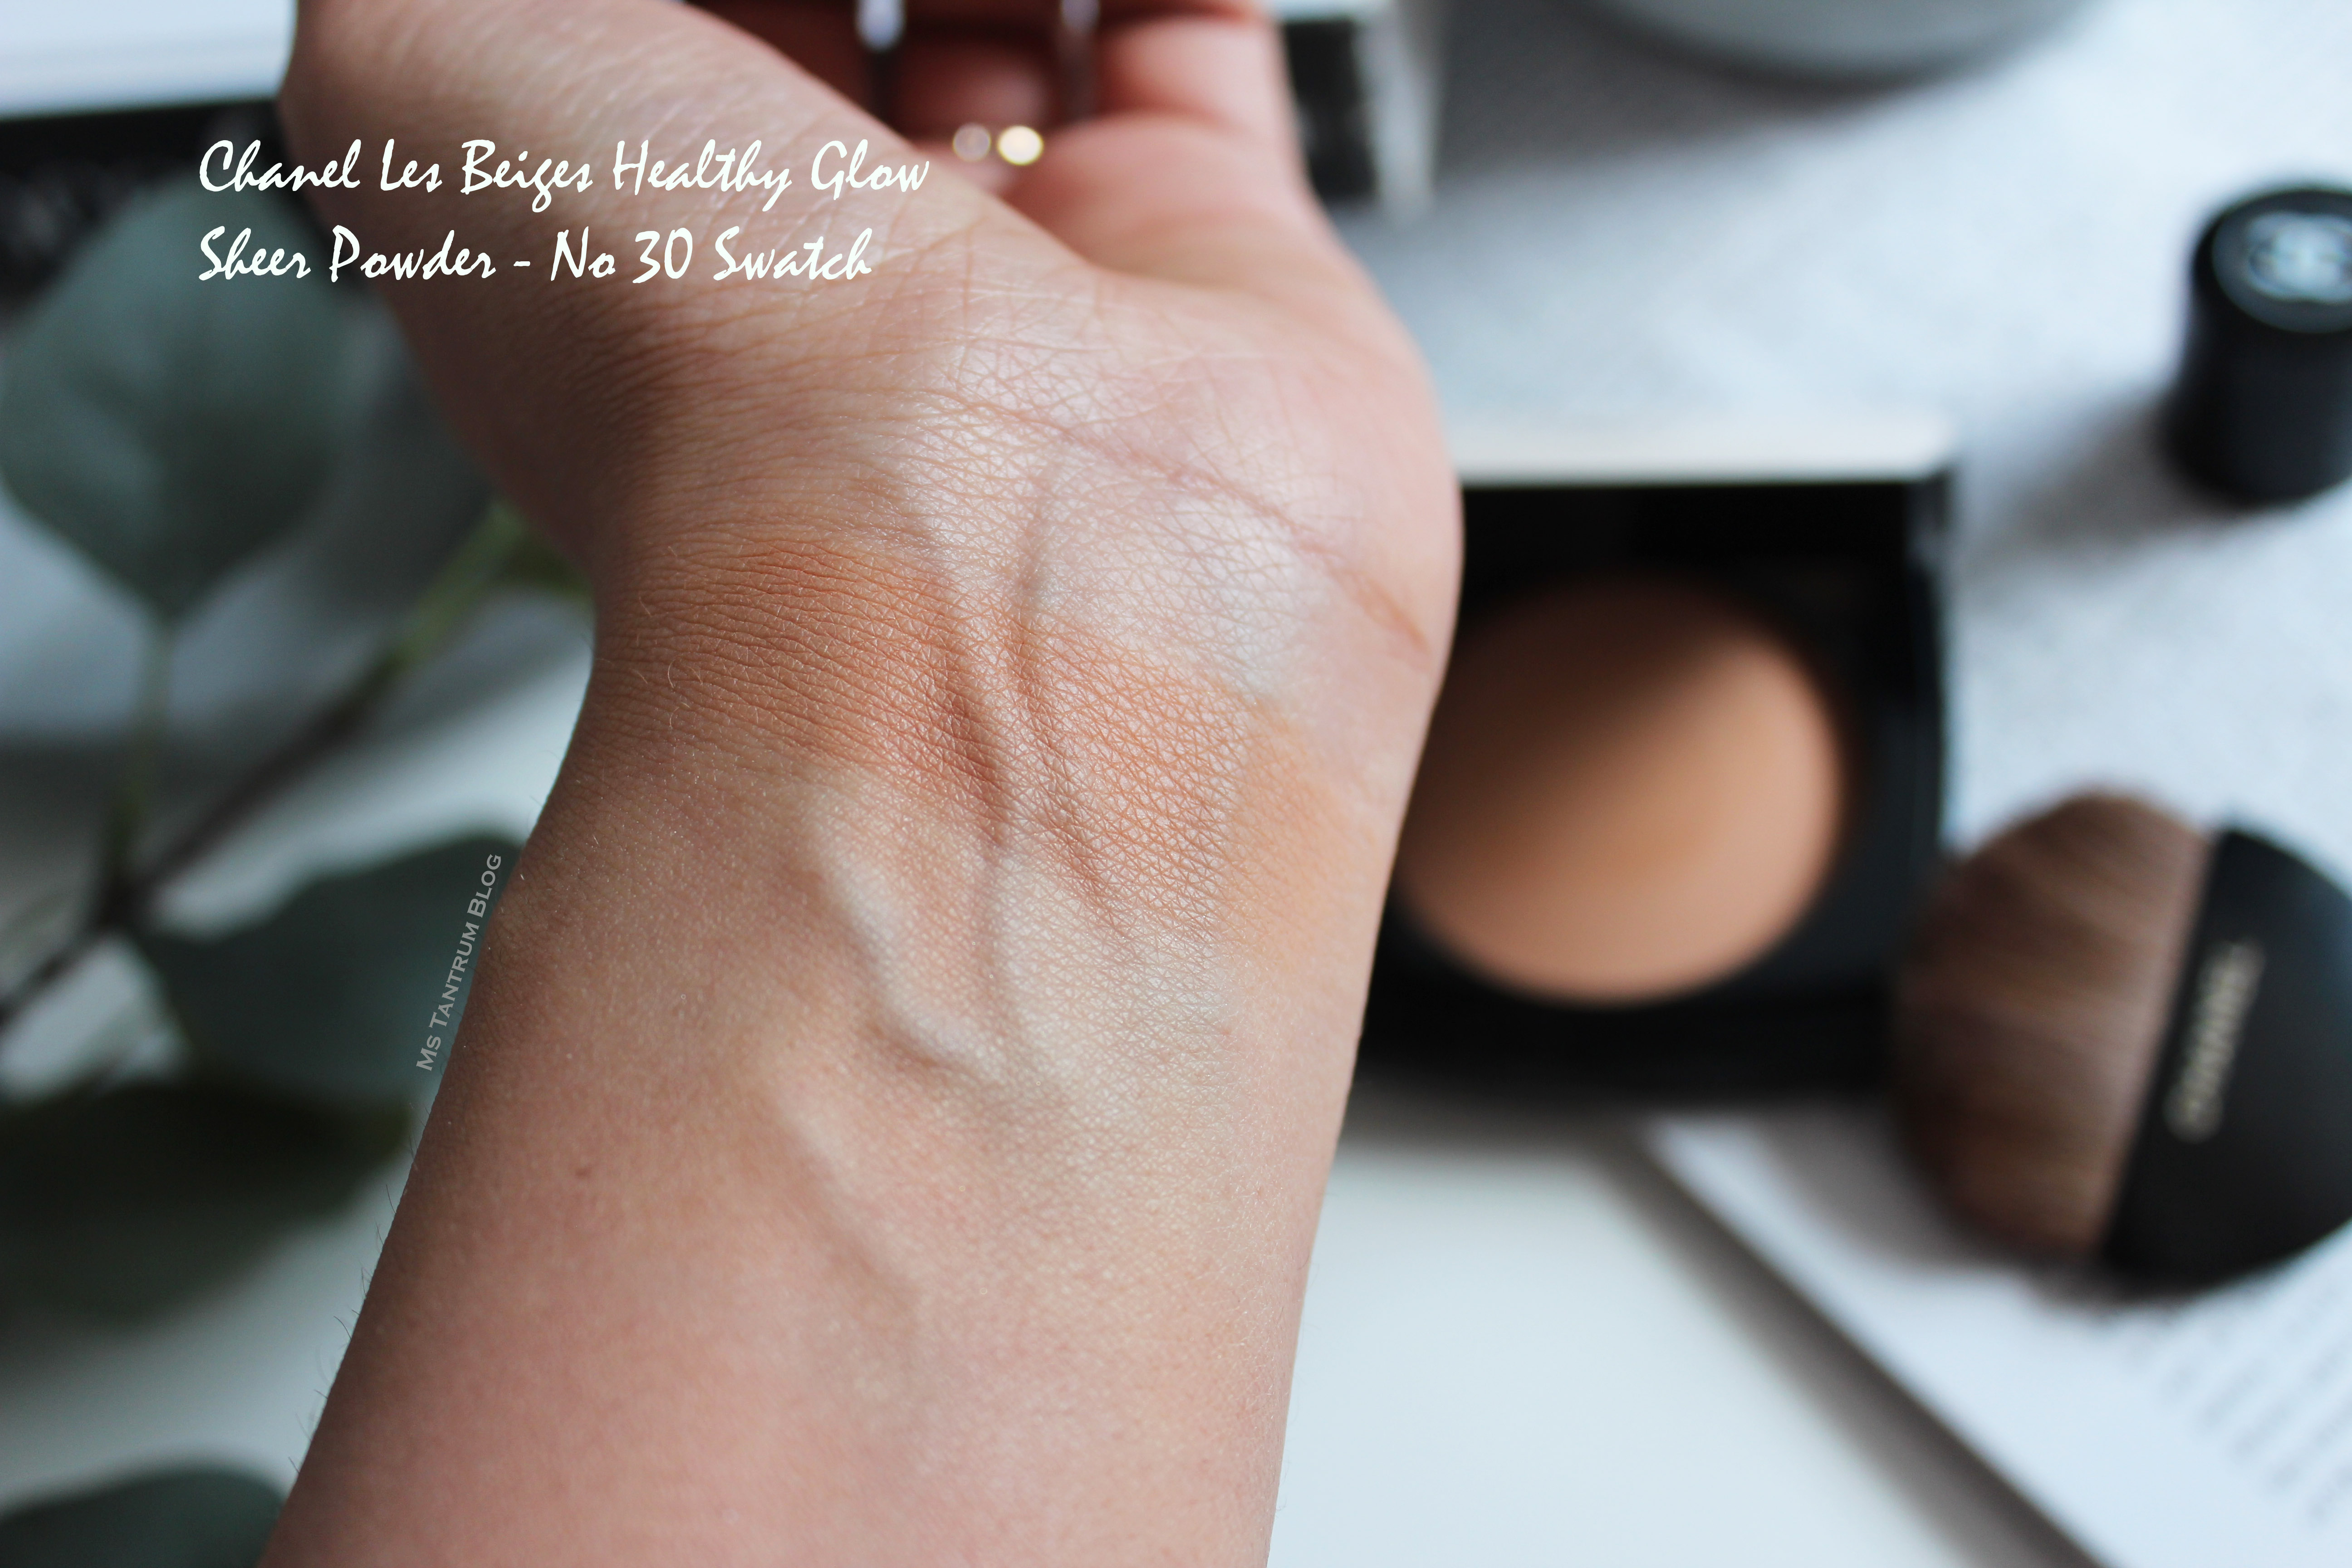 Chanel Les Beiges Healthy Glow Sheer Powder Swatch